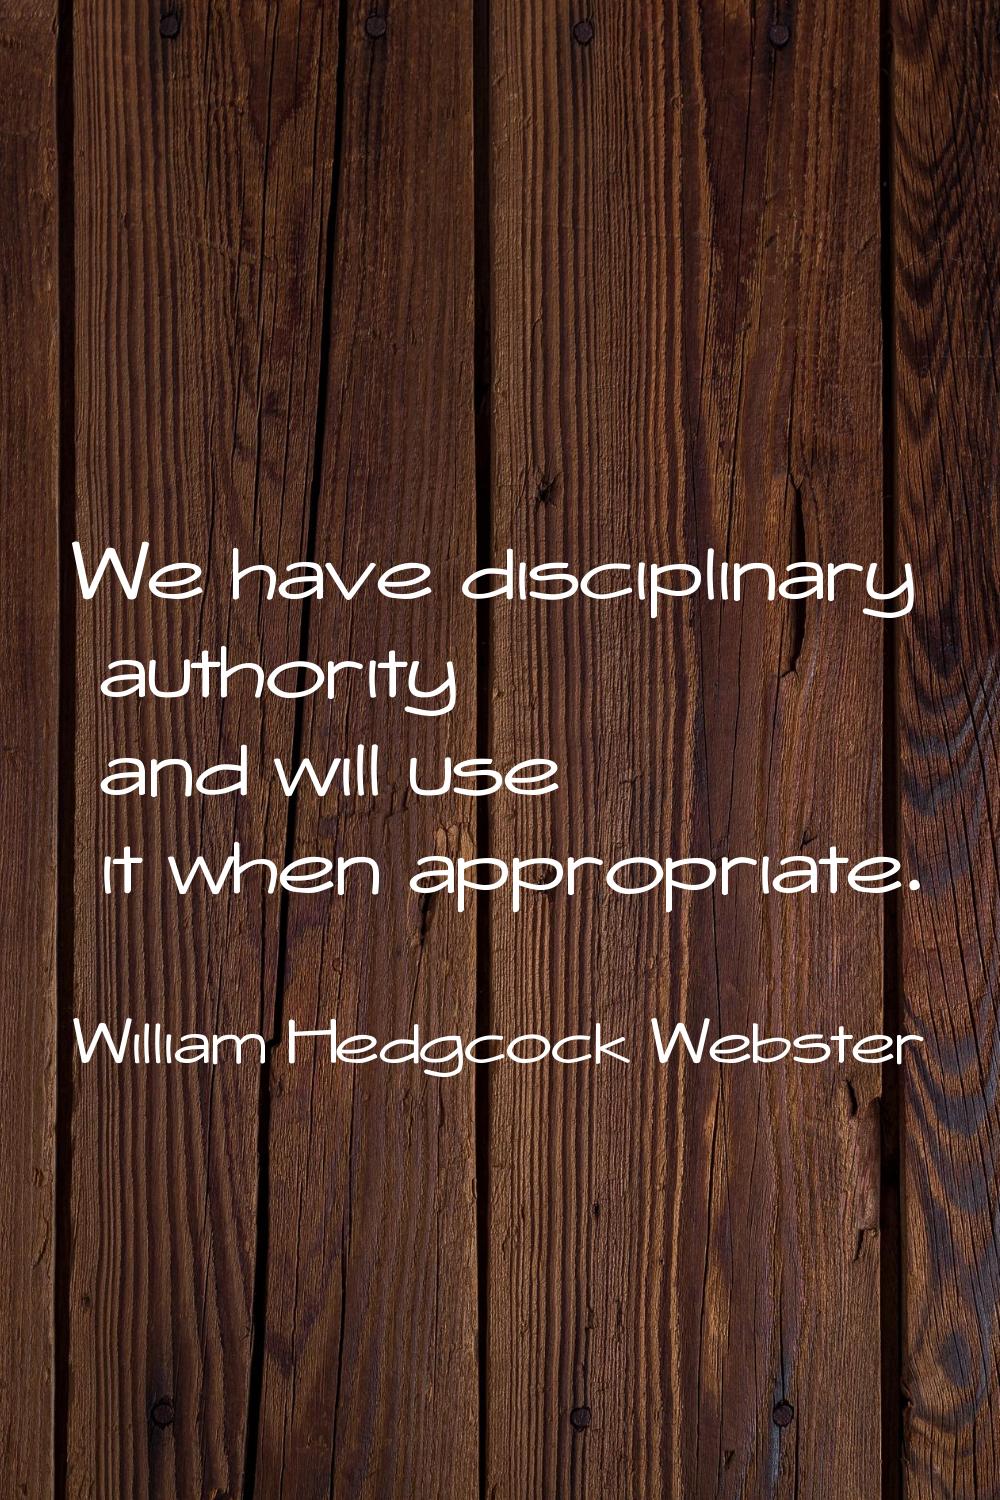 We have disciplinary authority and will use it when appropriate.